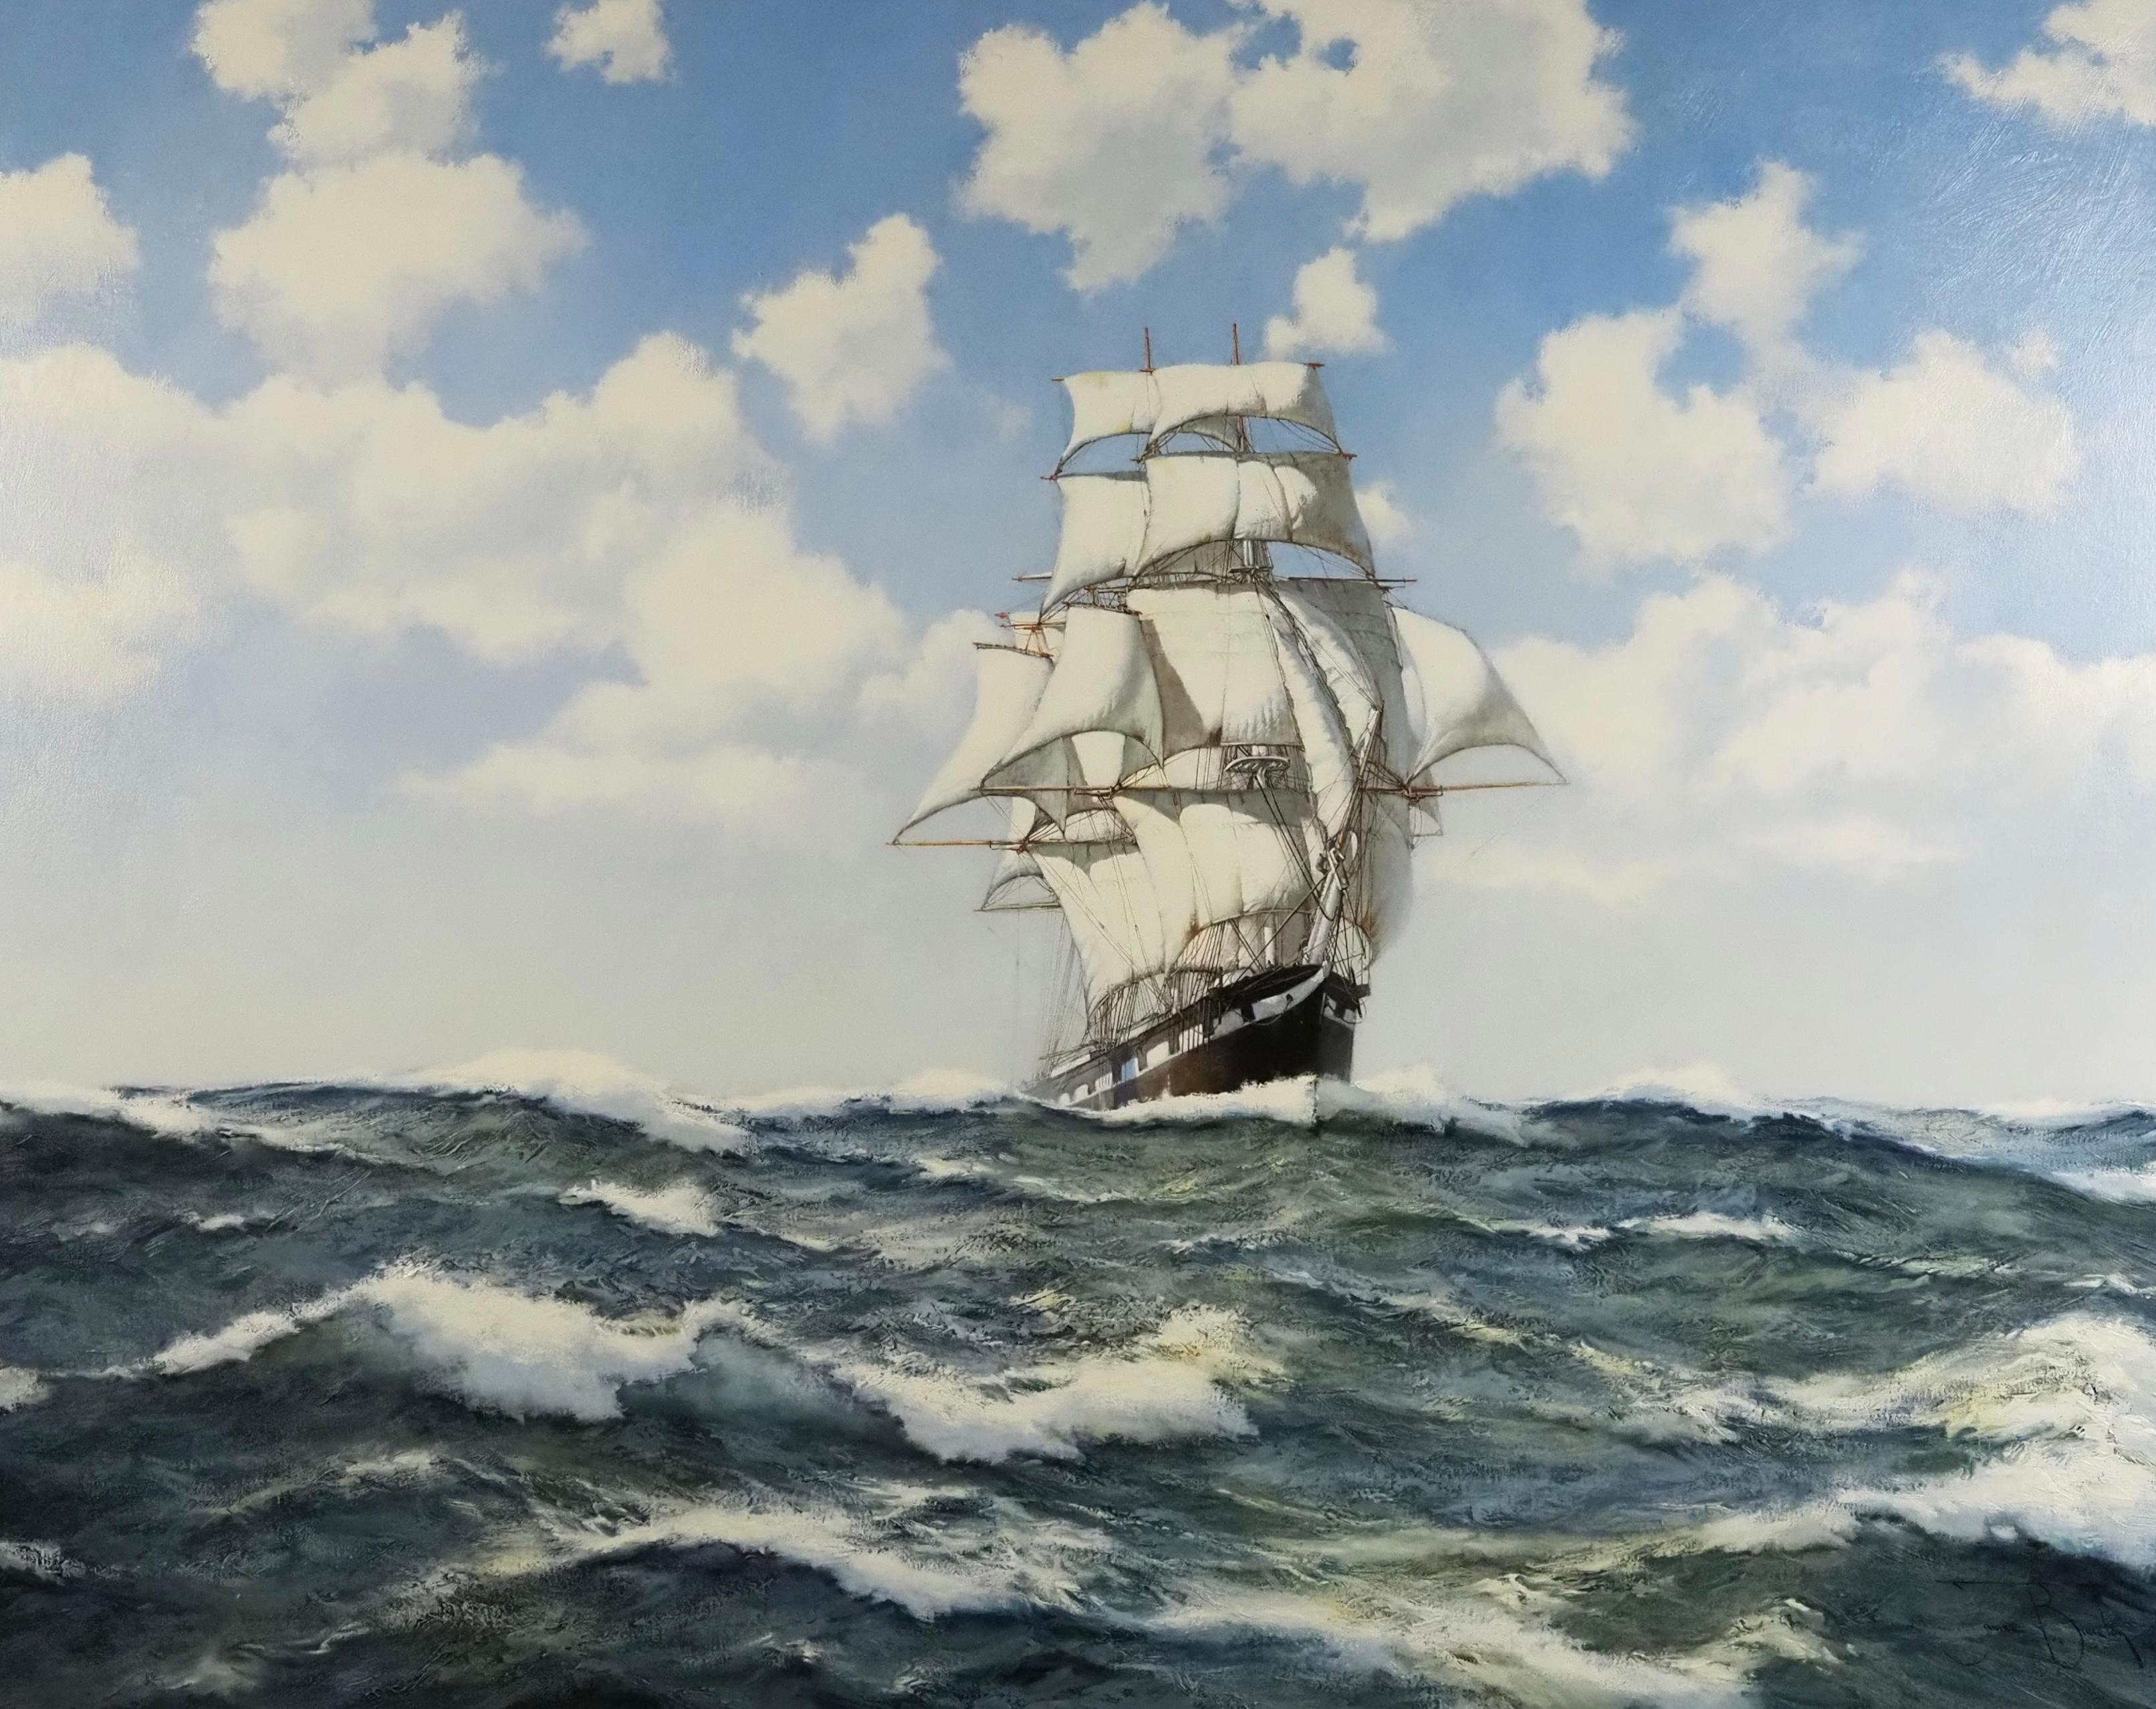 Mounting the waves - Painting by James Brereton